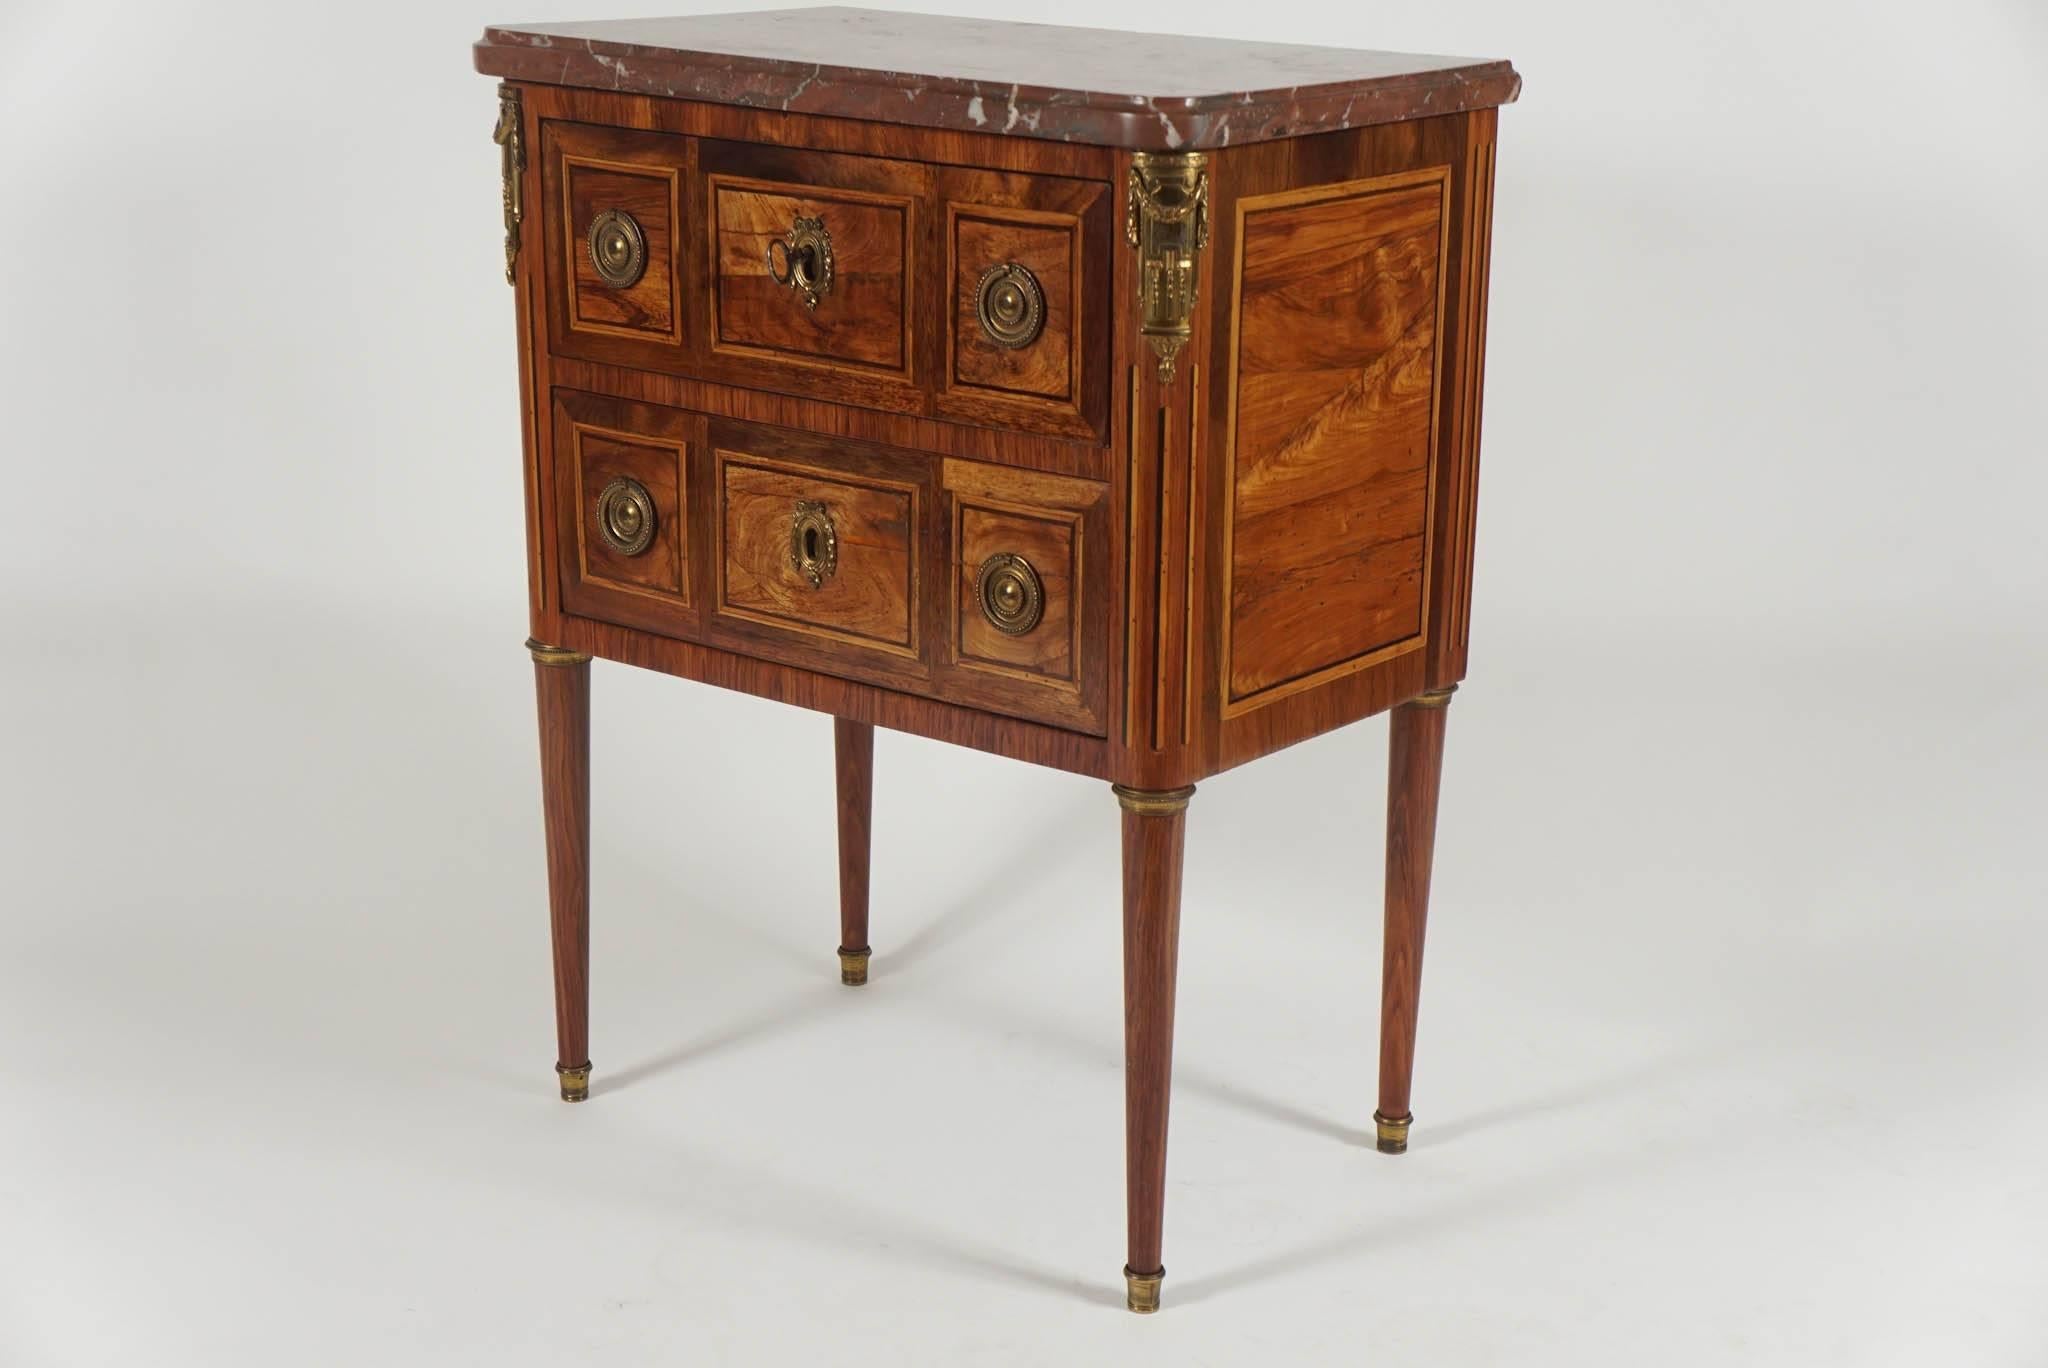 French Louis XVI Petite Commode or Chest on Stand by Conrad Mauter, circa 1780